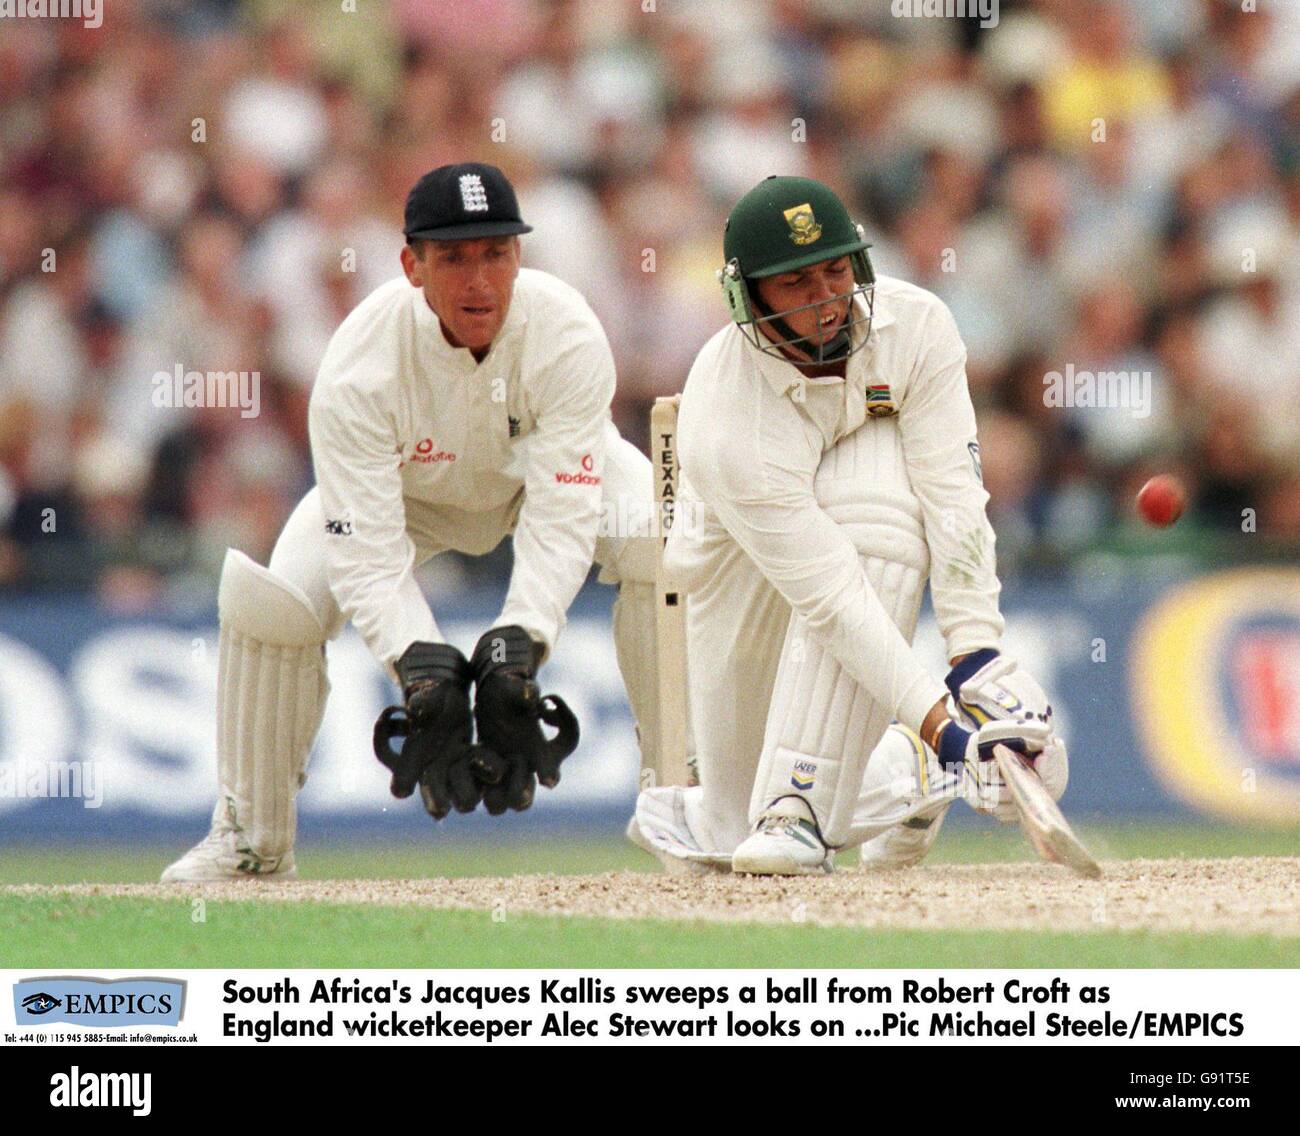 South Africa's Jacques Kallis sweeps a ball from Robert Croft as England wicketkeeper Alec Stewart looks on Stock Photo